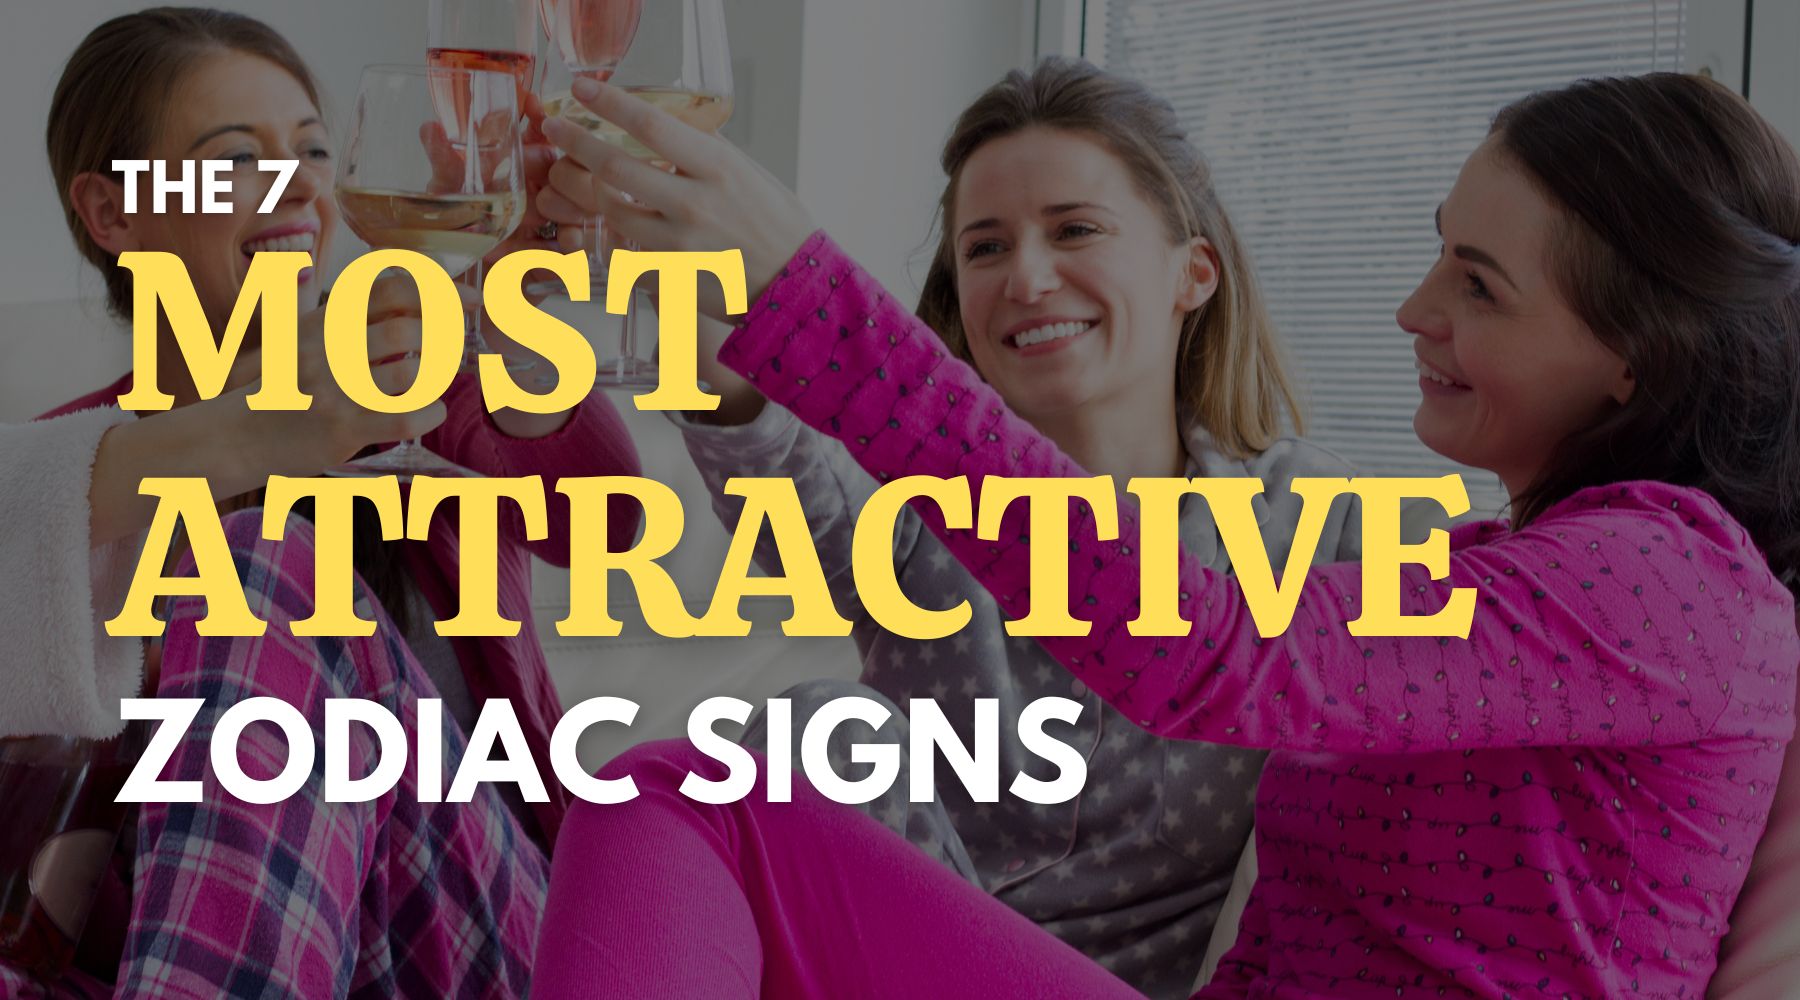 The 7 most attractive zodiac signs, and how they will find a Partner